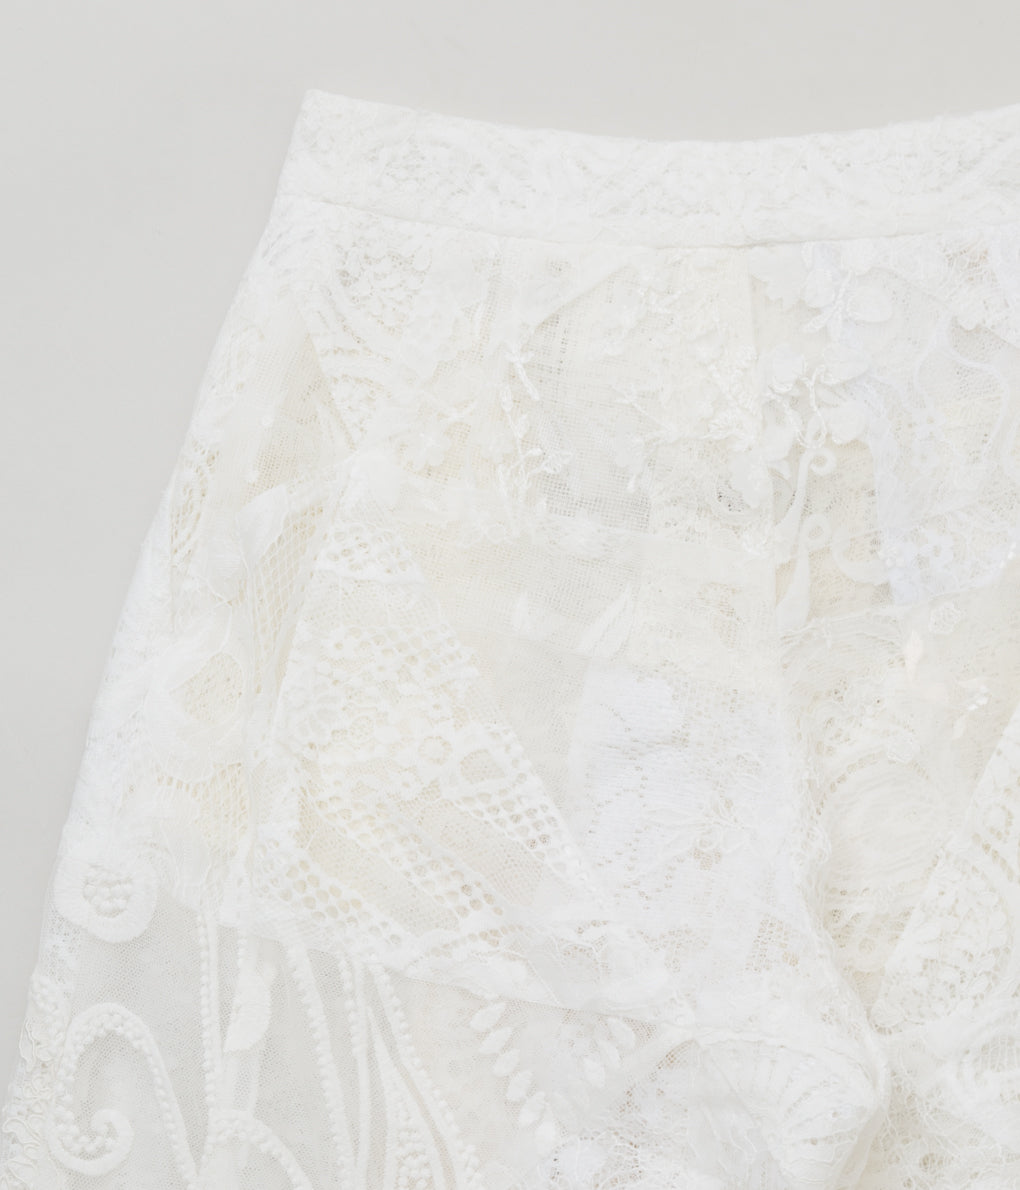 PHOEBE ENGLISH "PATCHWORK LACE TROUSERS"(OFF WHITE)